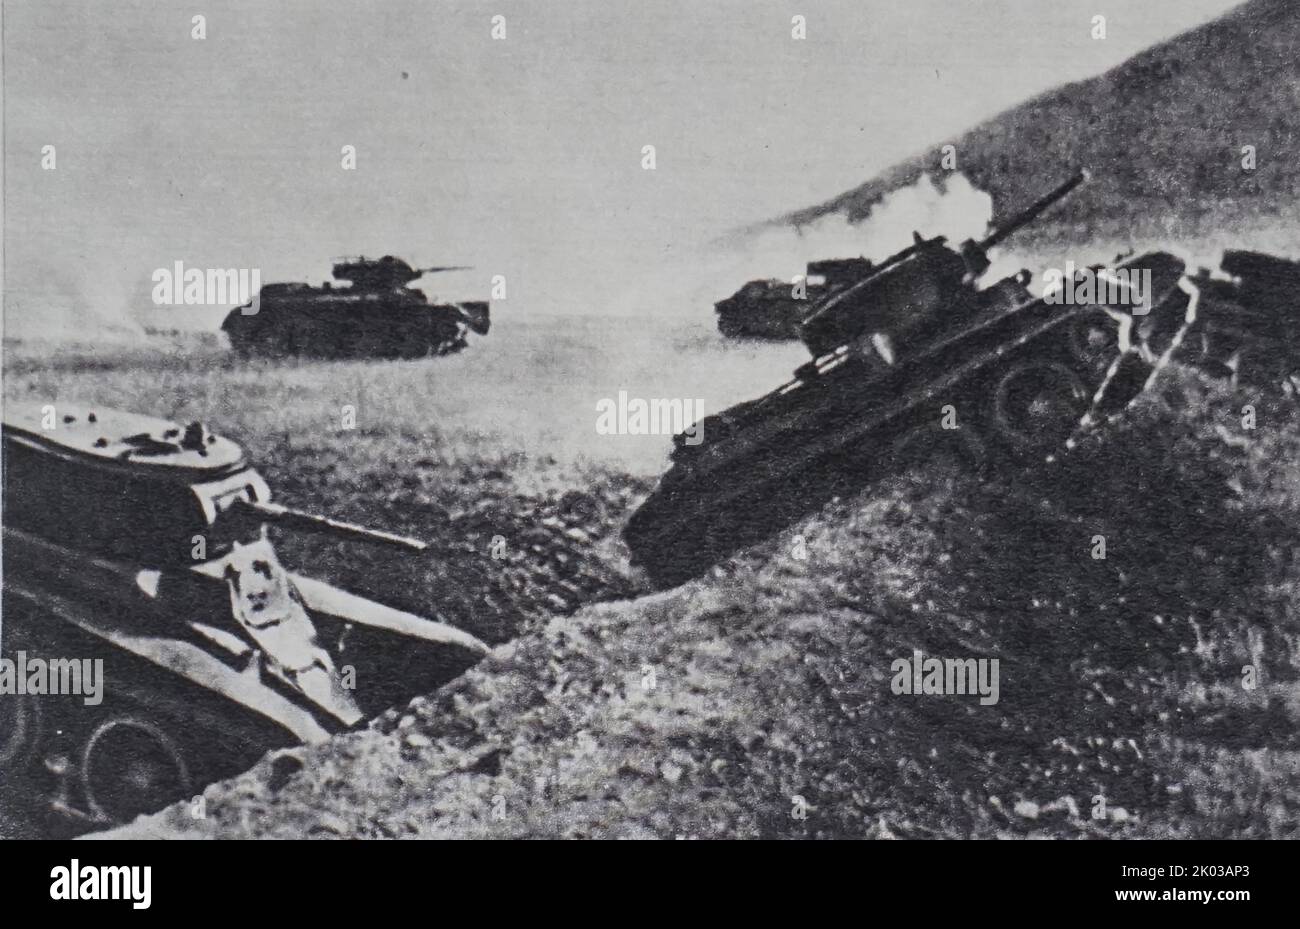 Soviet armoured unit advancing against German army. Russia, World War Two 1941. Stock Photo